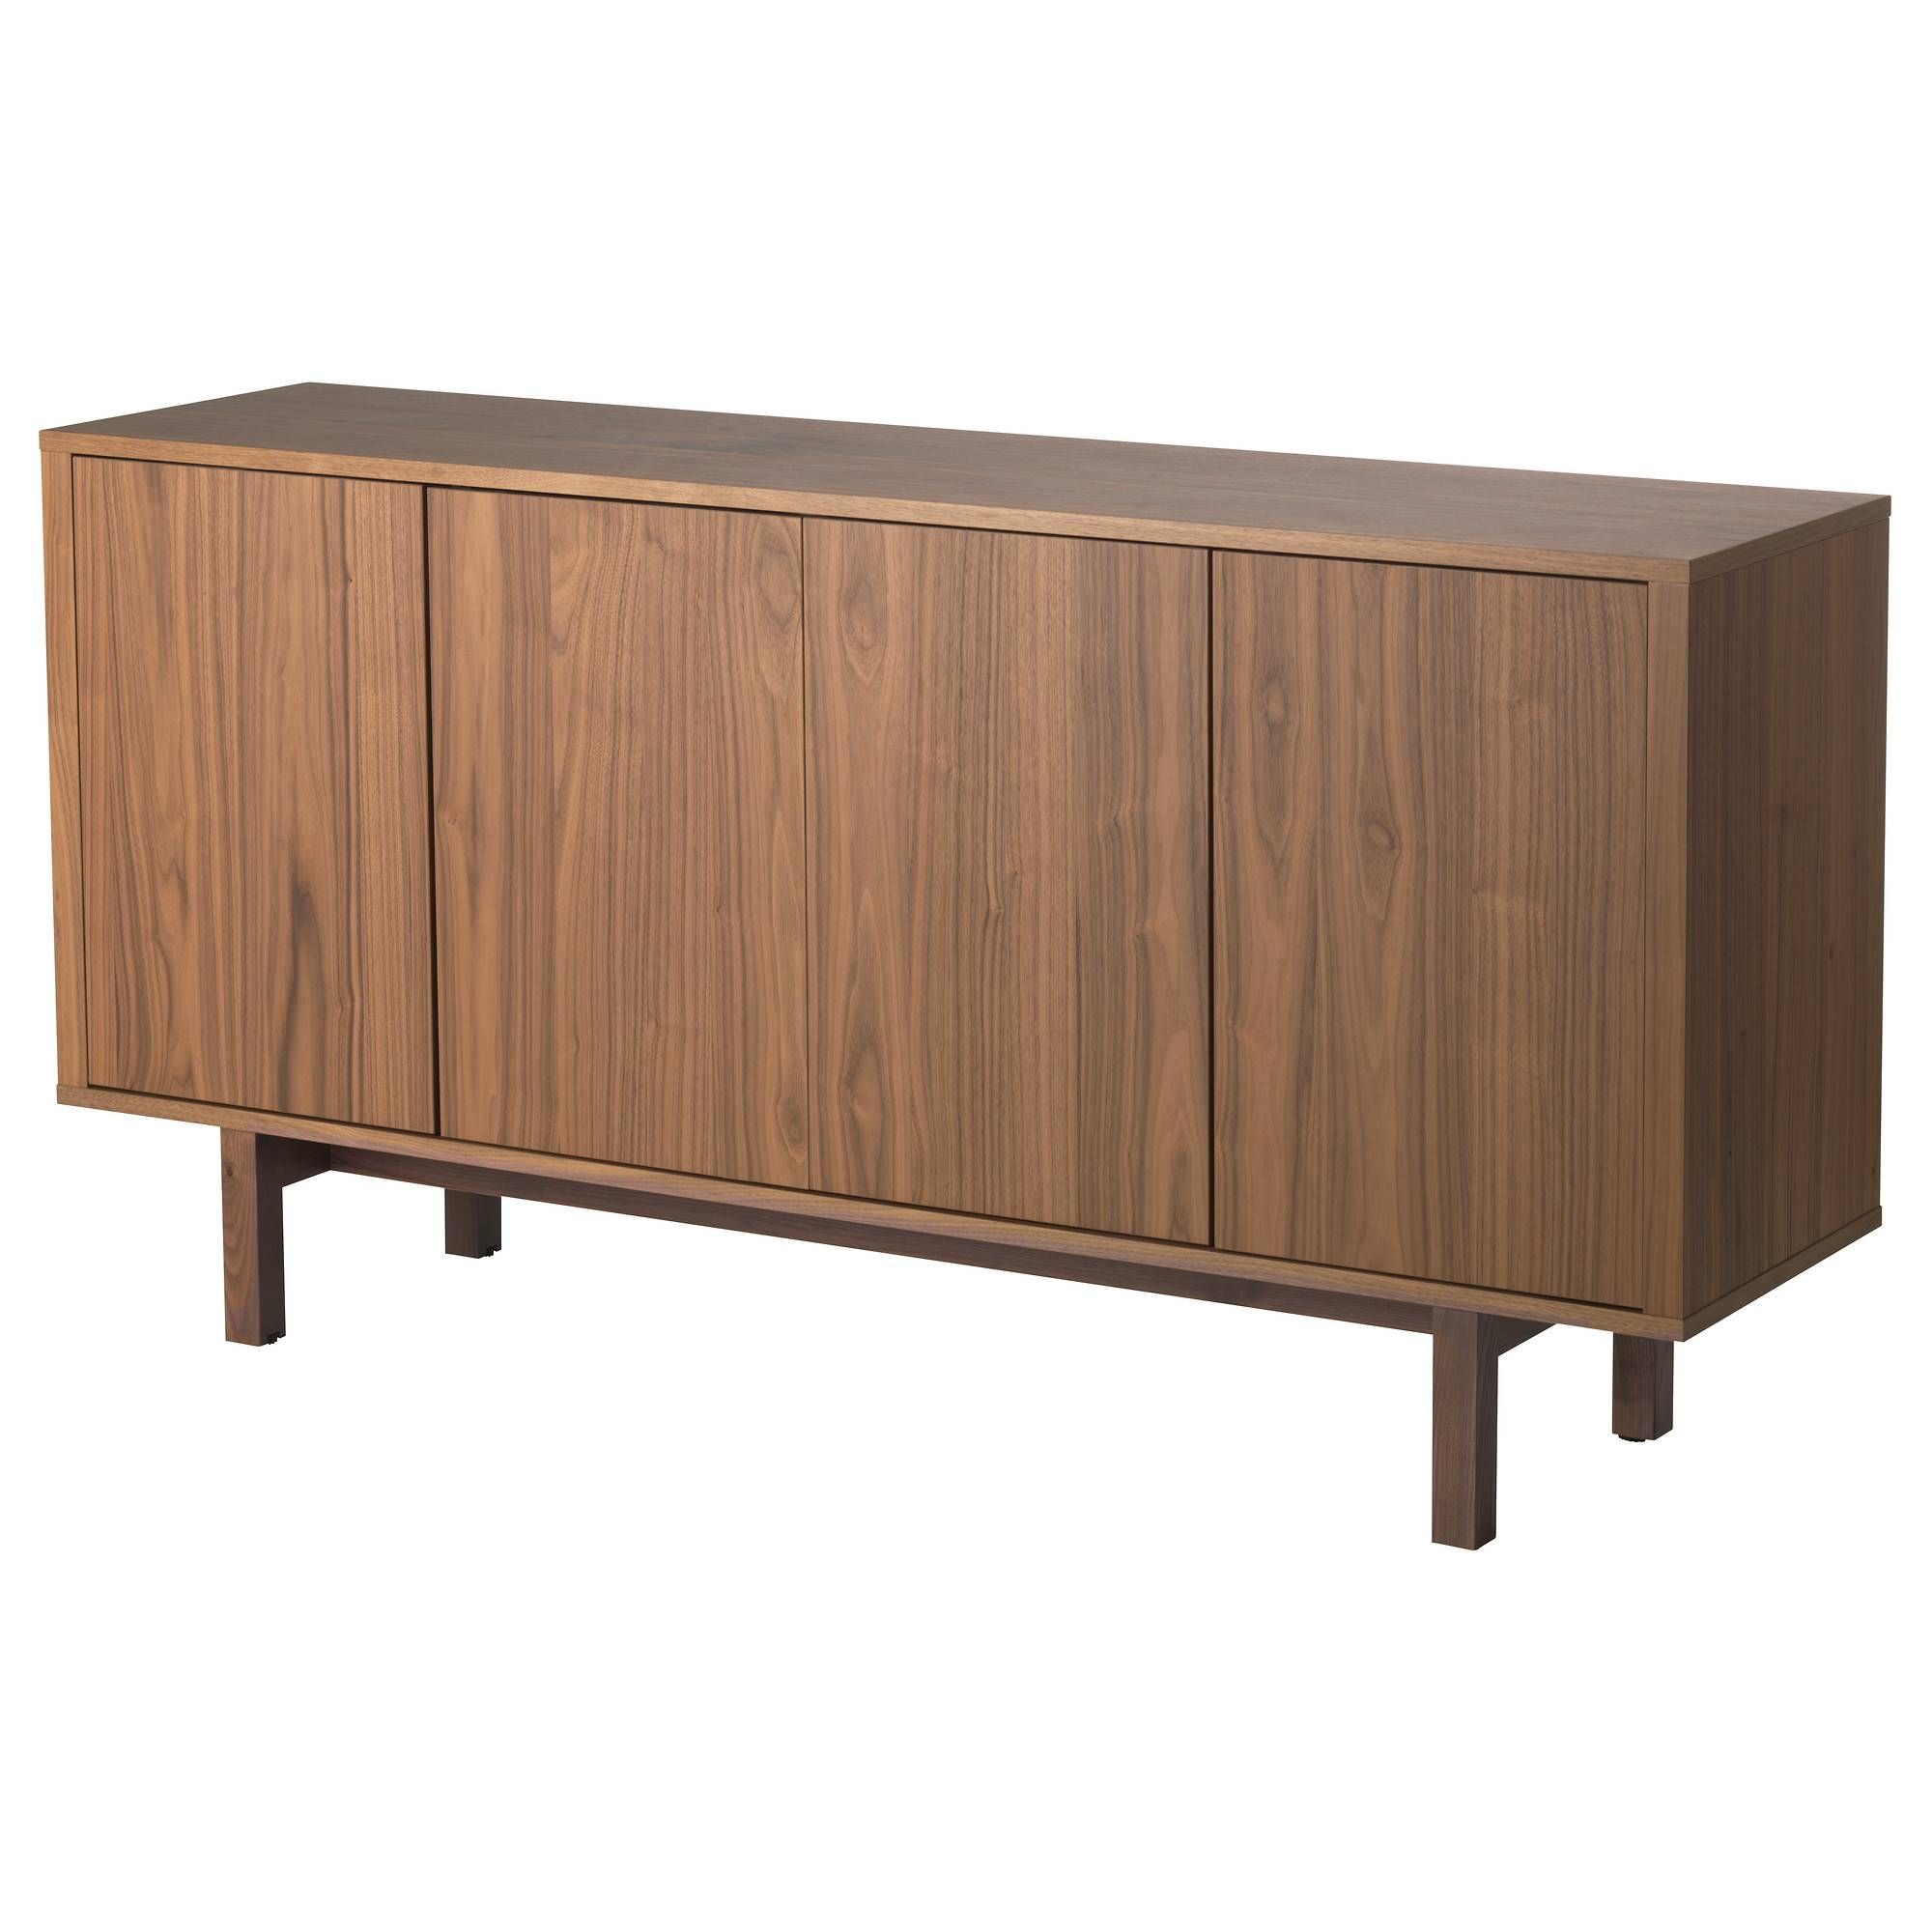 Buffet Tables & Sideboards – Ikea Throughout Sideboard Units (View 10 of 20)